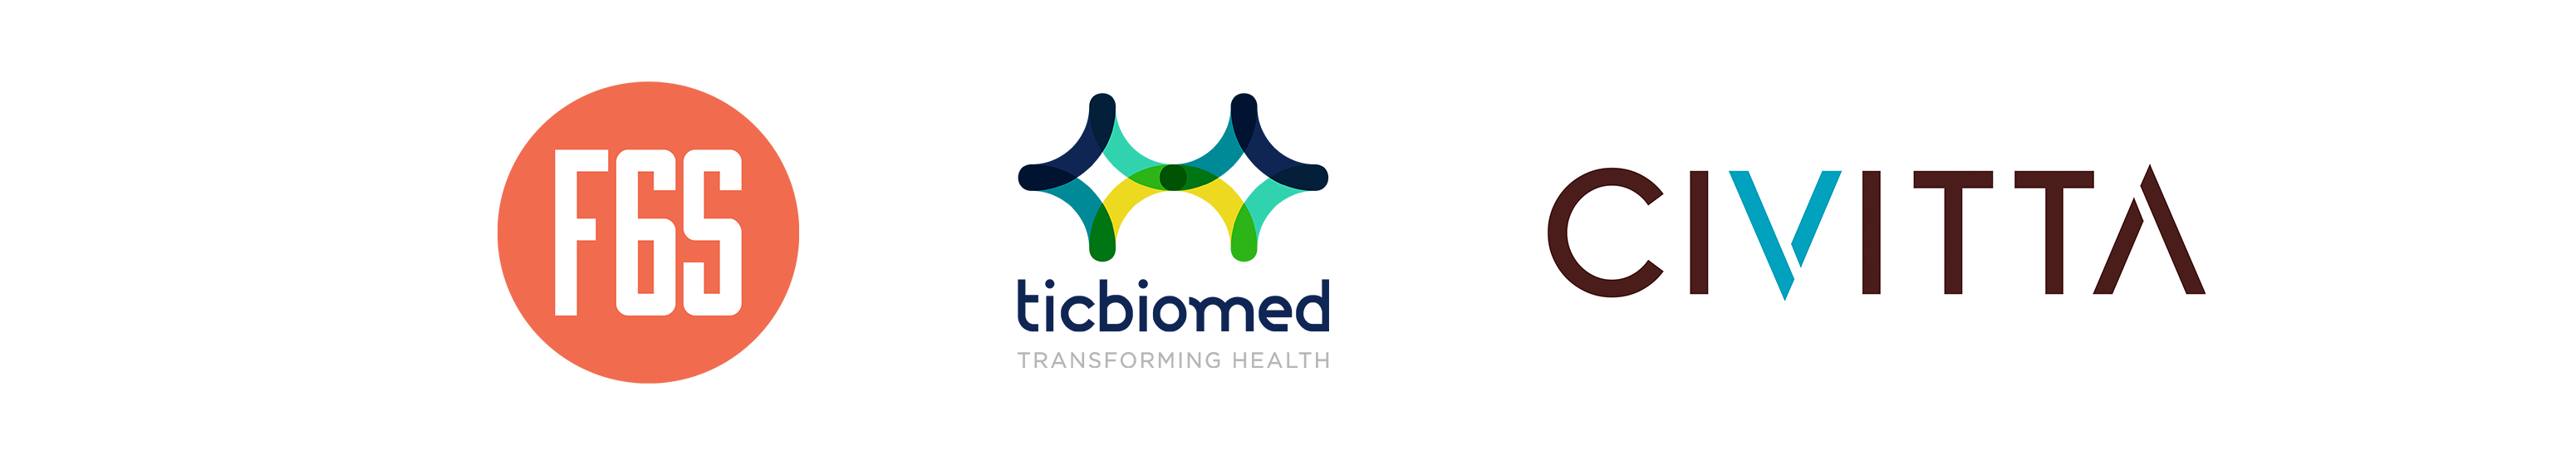 Logos of F6S, Ticbiomed (transforming health) and CIVITTA